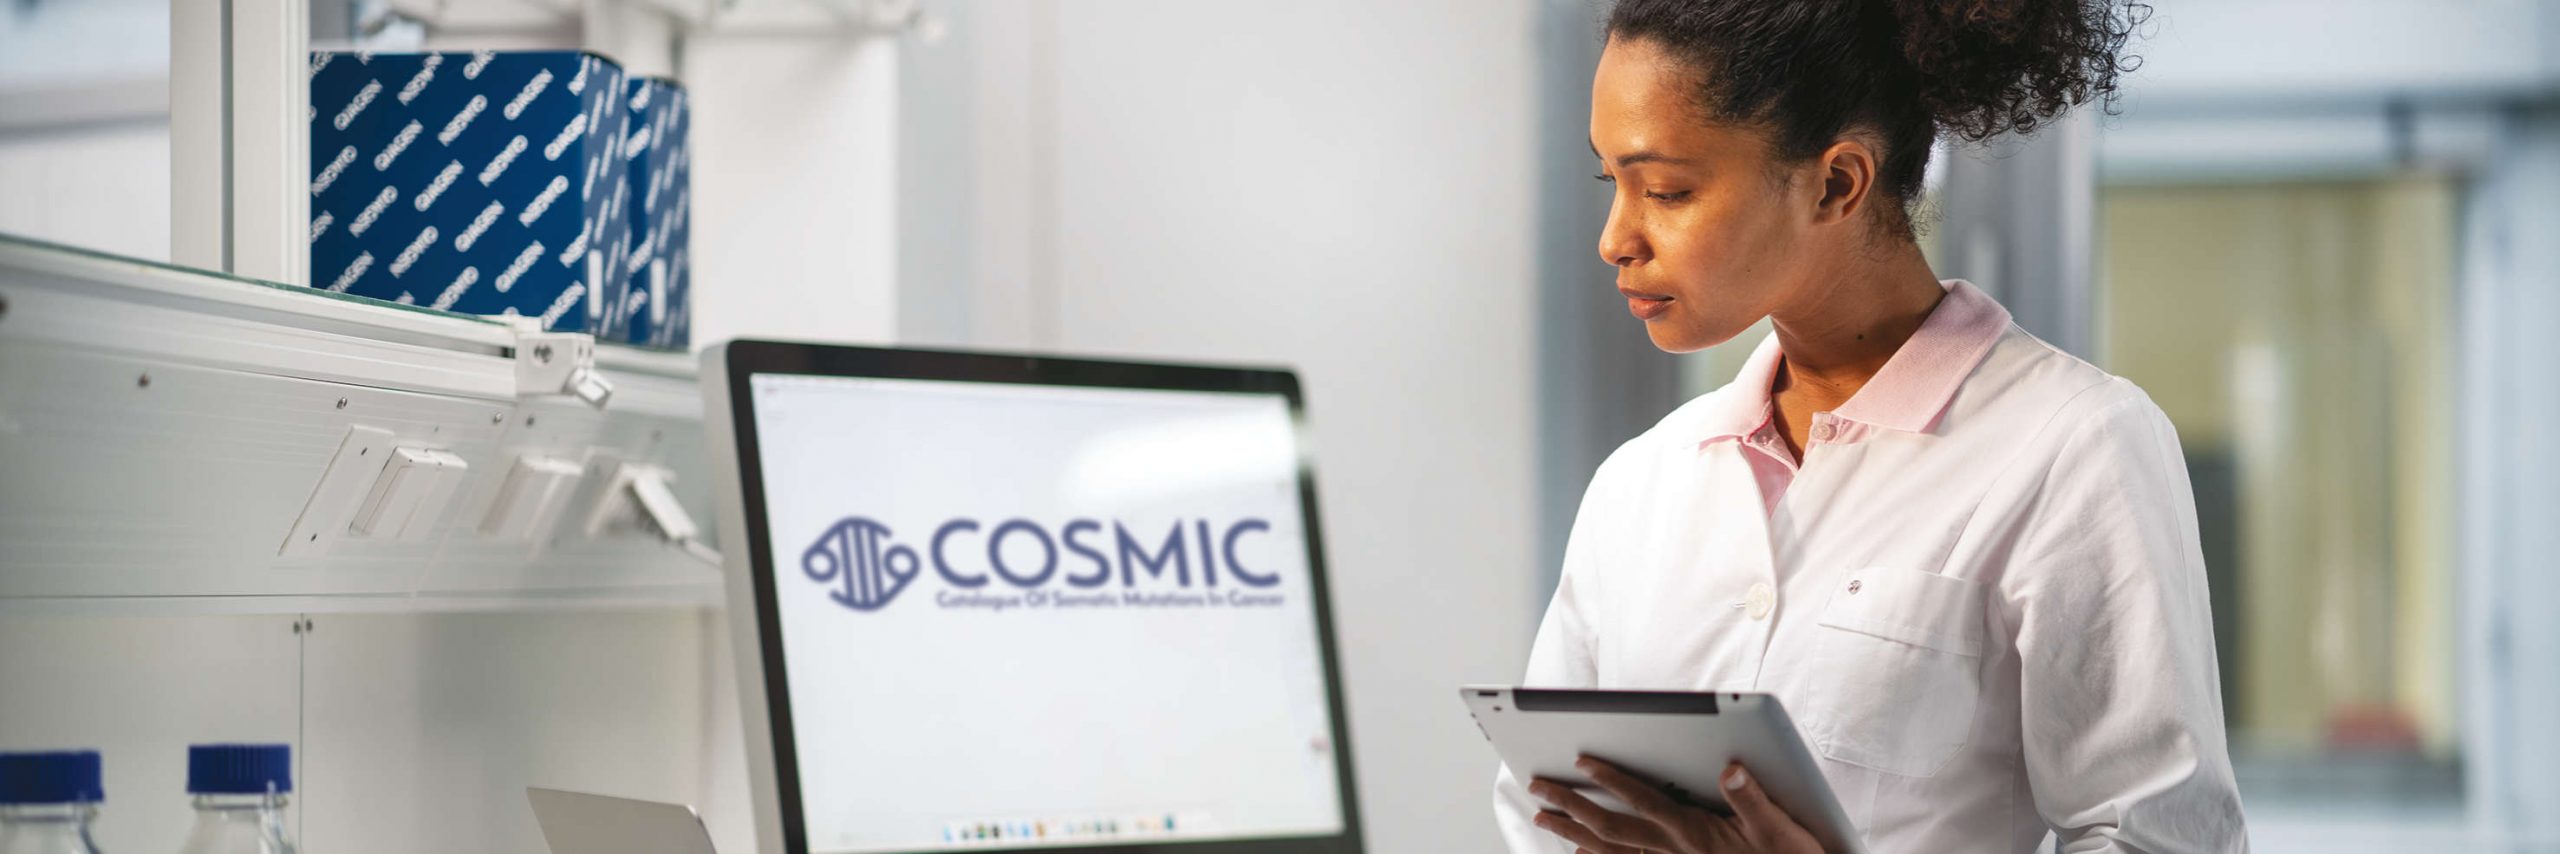 5 reasons why you should use COSMIC to identify cancer mutations